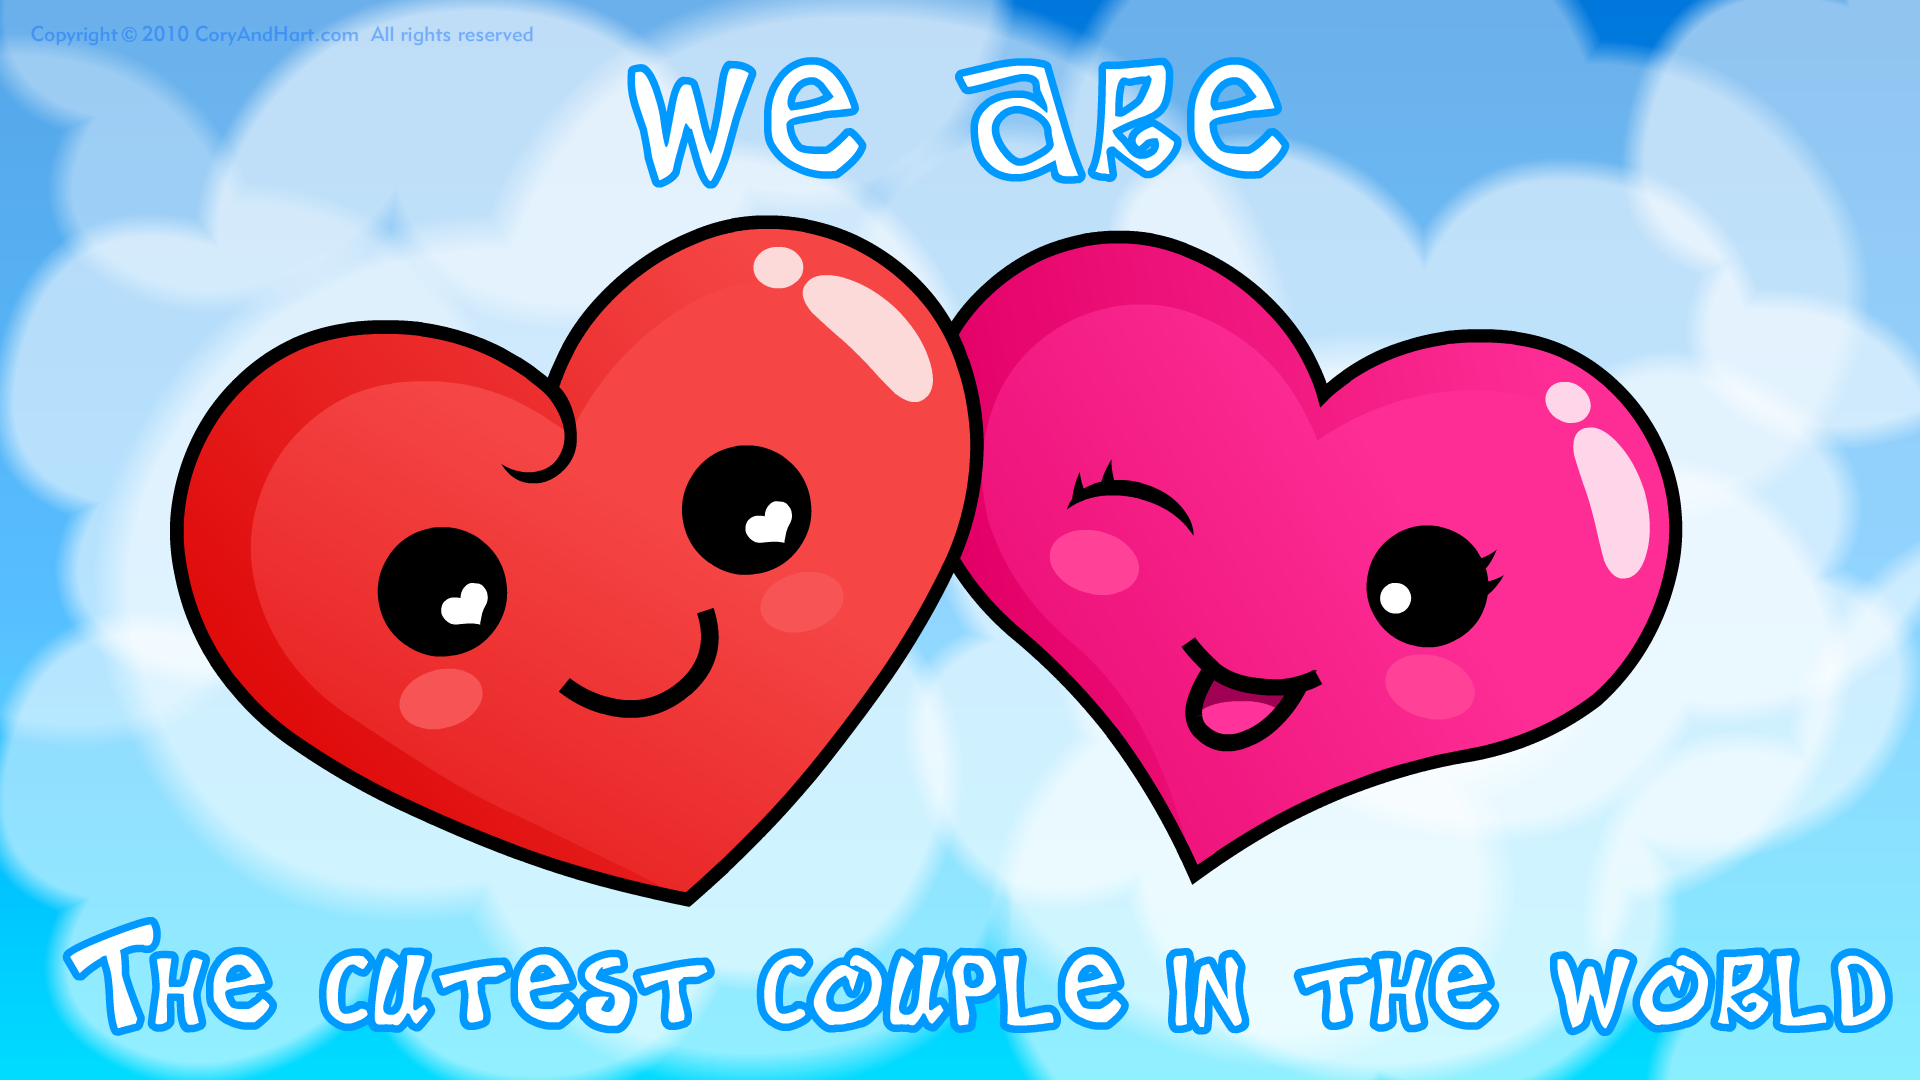 17+ ideas about Cute Love Wallpapers on Pinterest | Cute love